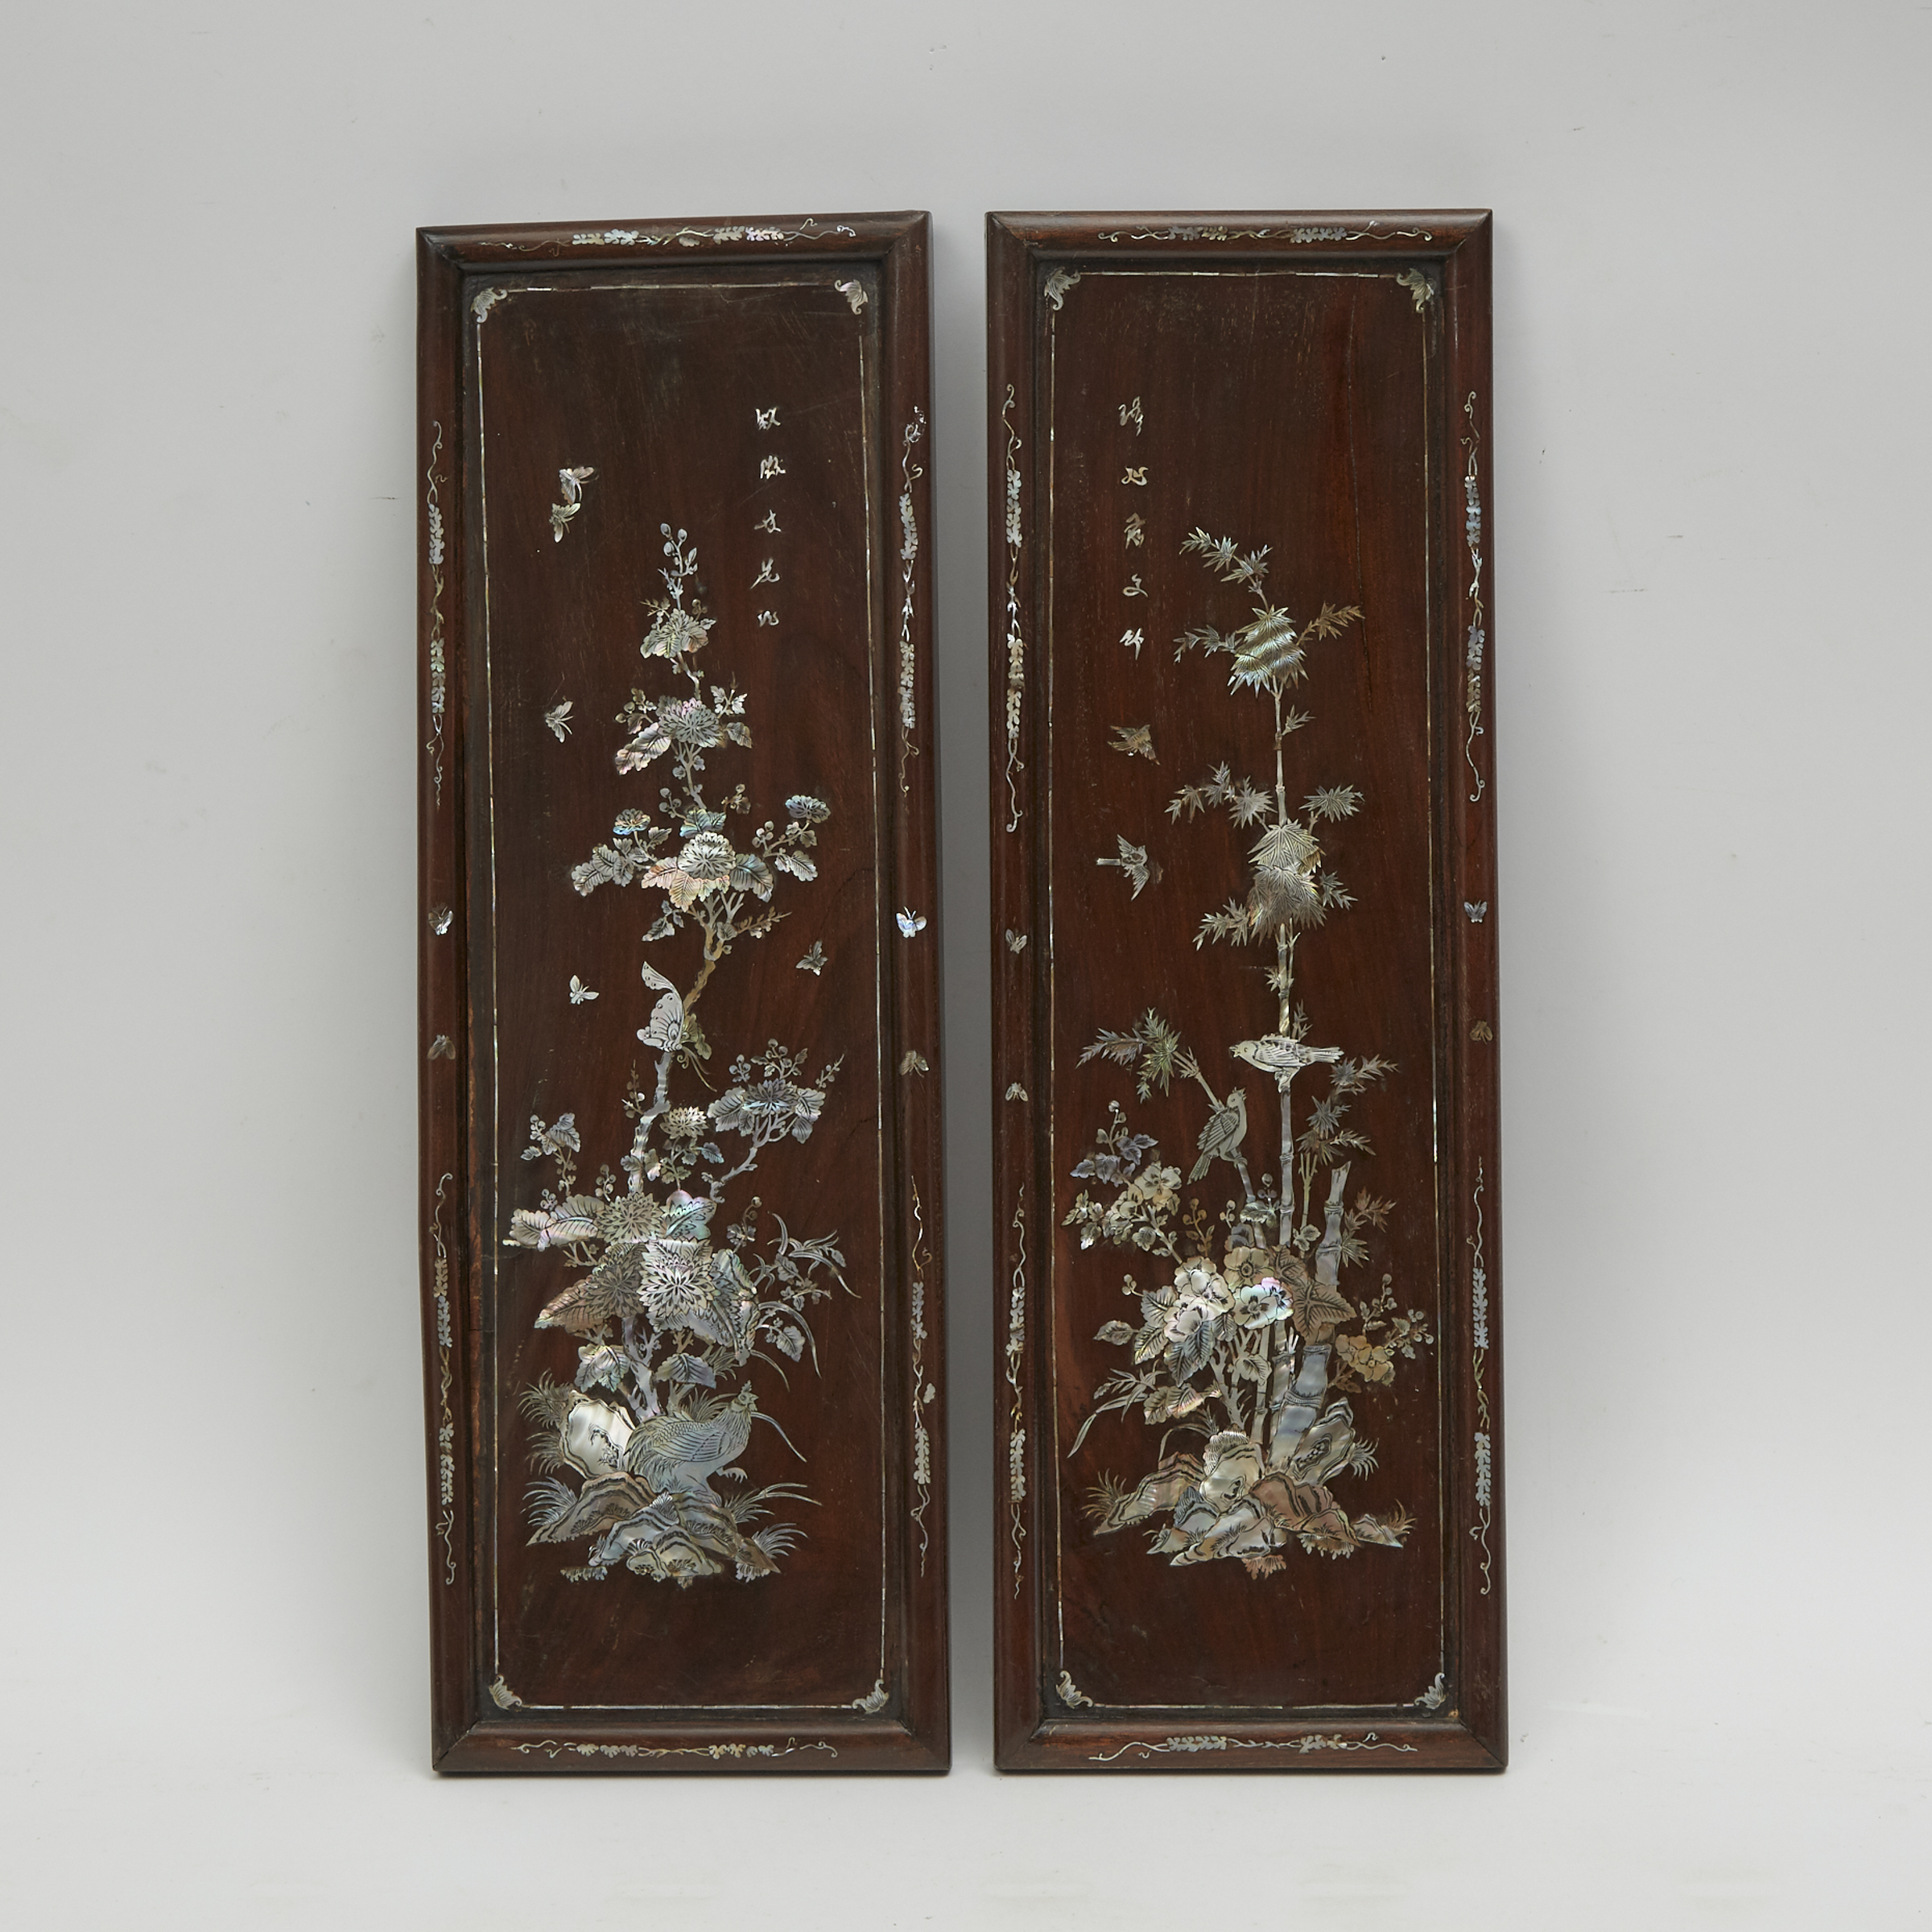 A Pair of Chinese Mother-of-Pearl Inlaid Hanging Panels